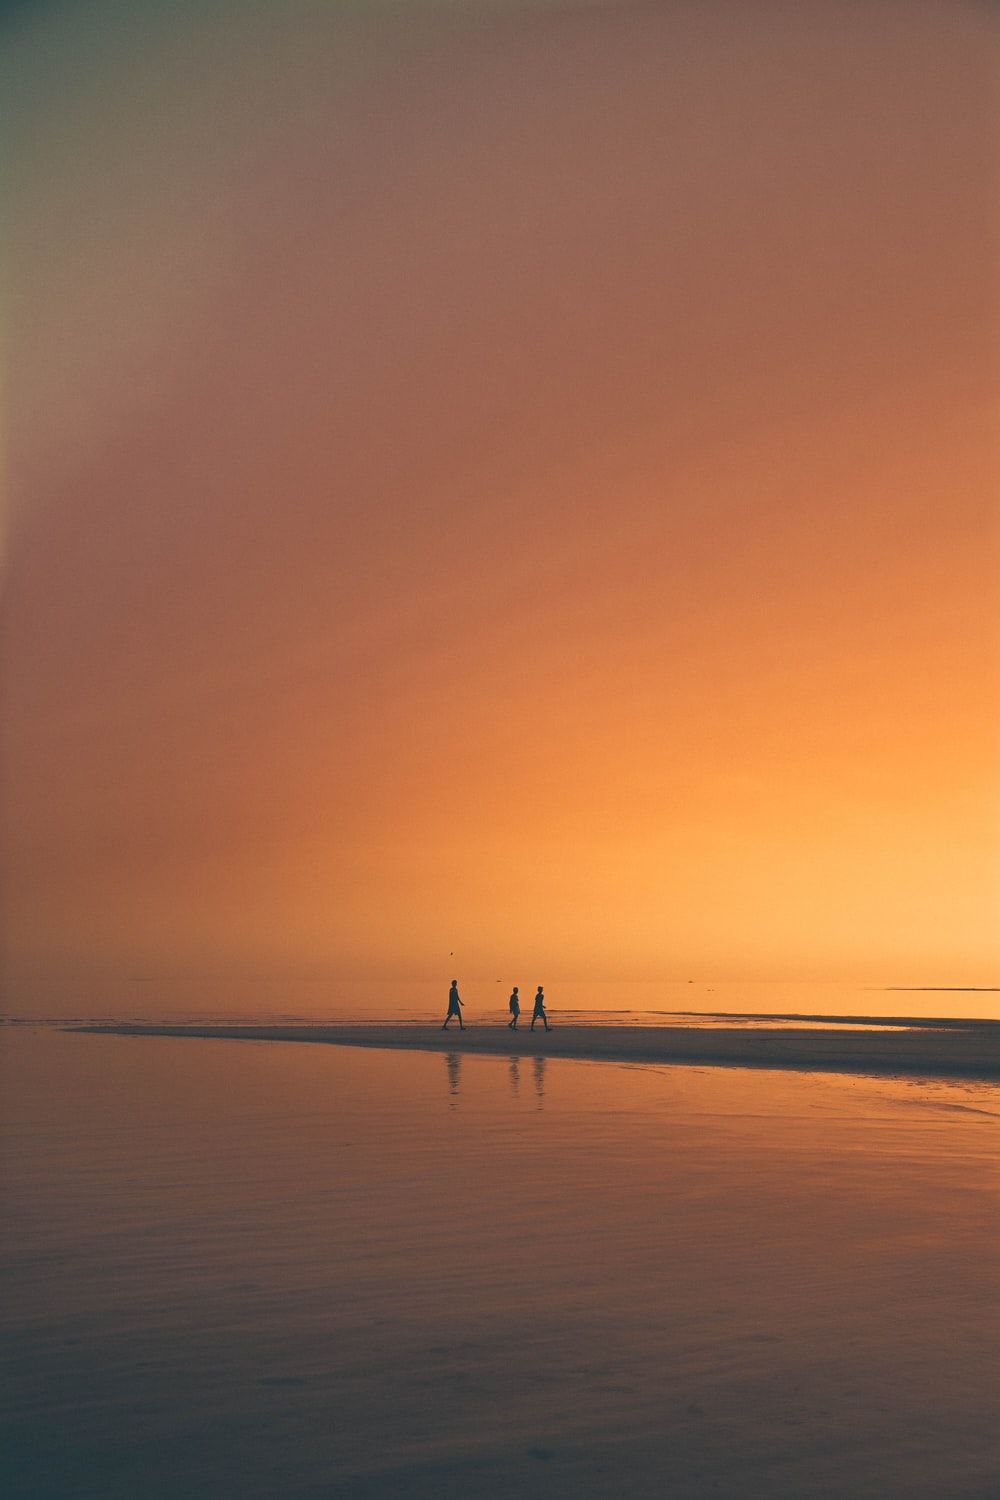 A group of people walking on the beach - Sunrise